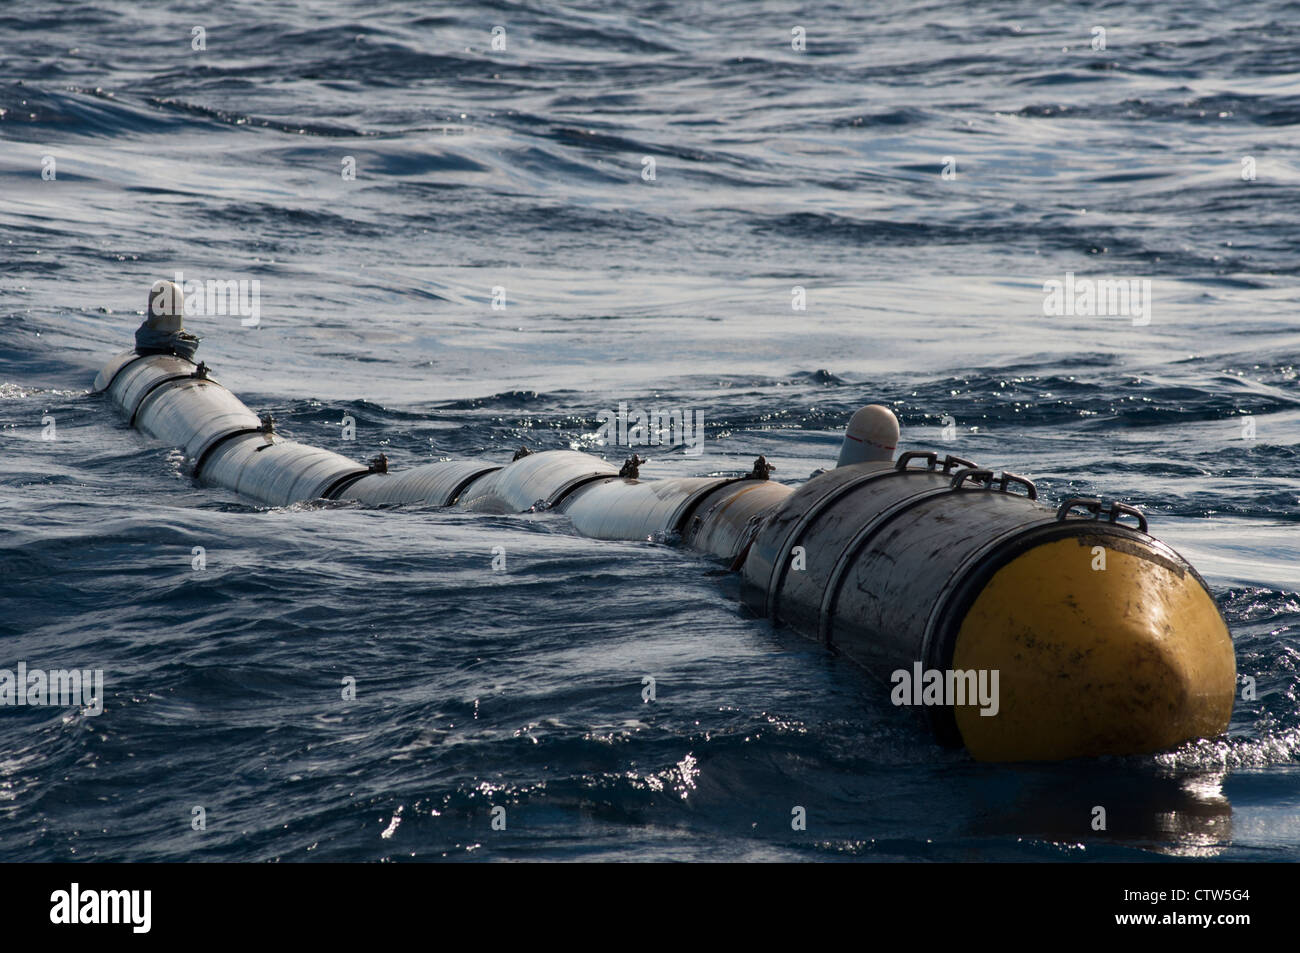 Seismic air gun been towed by a seismic vessel in offshore area Stock Photo